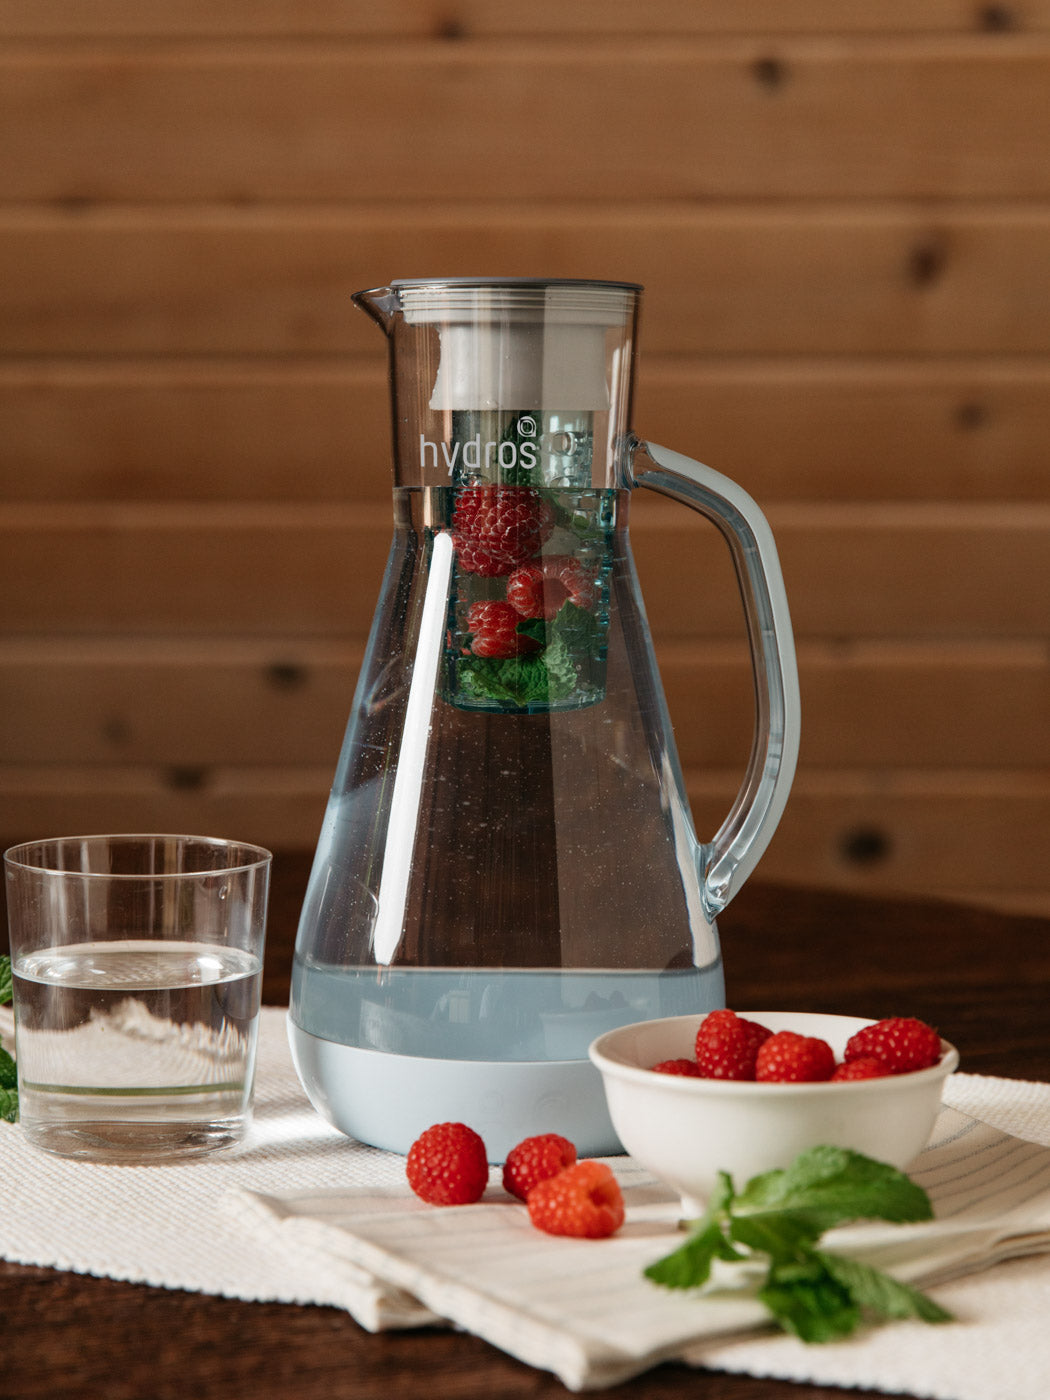 Water Pitcher Fruit Infuser With Lid for Flavored Water 2.9 Quart Bottle,  Includes infuser rod and Ice Core Rod, BPA-Free Plastic, Great For Cold  iced